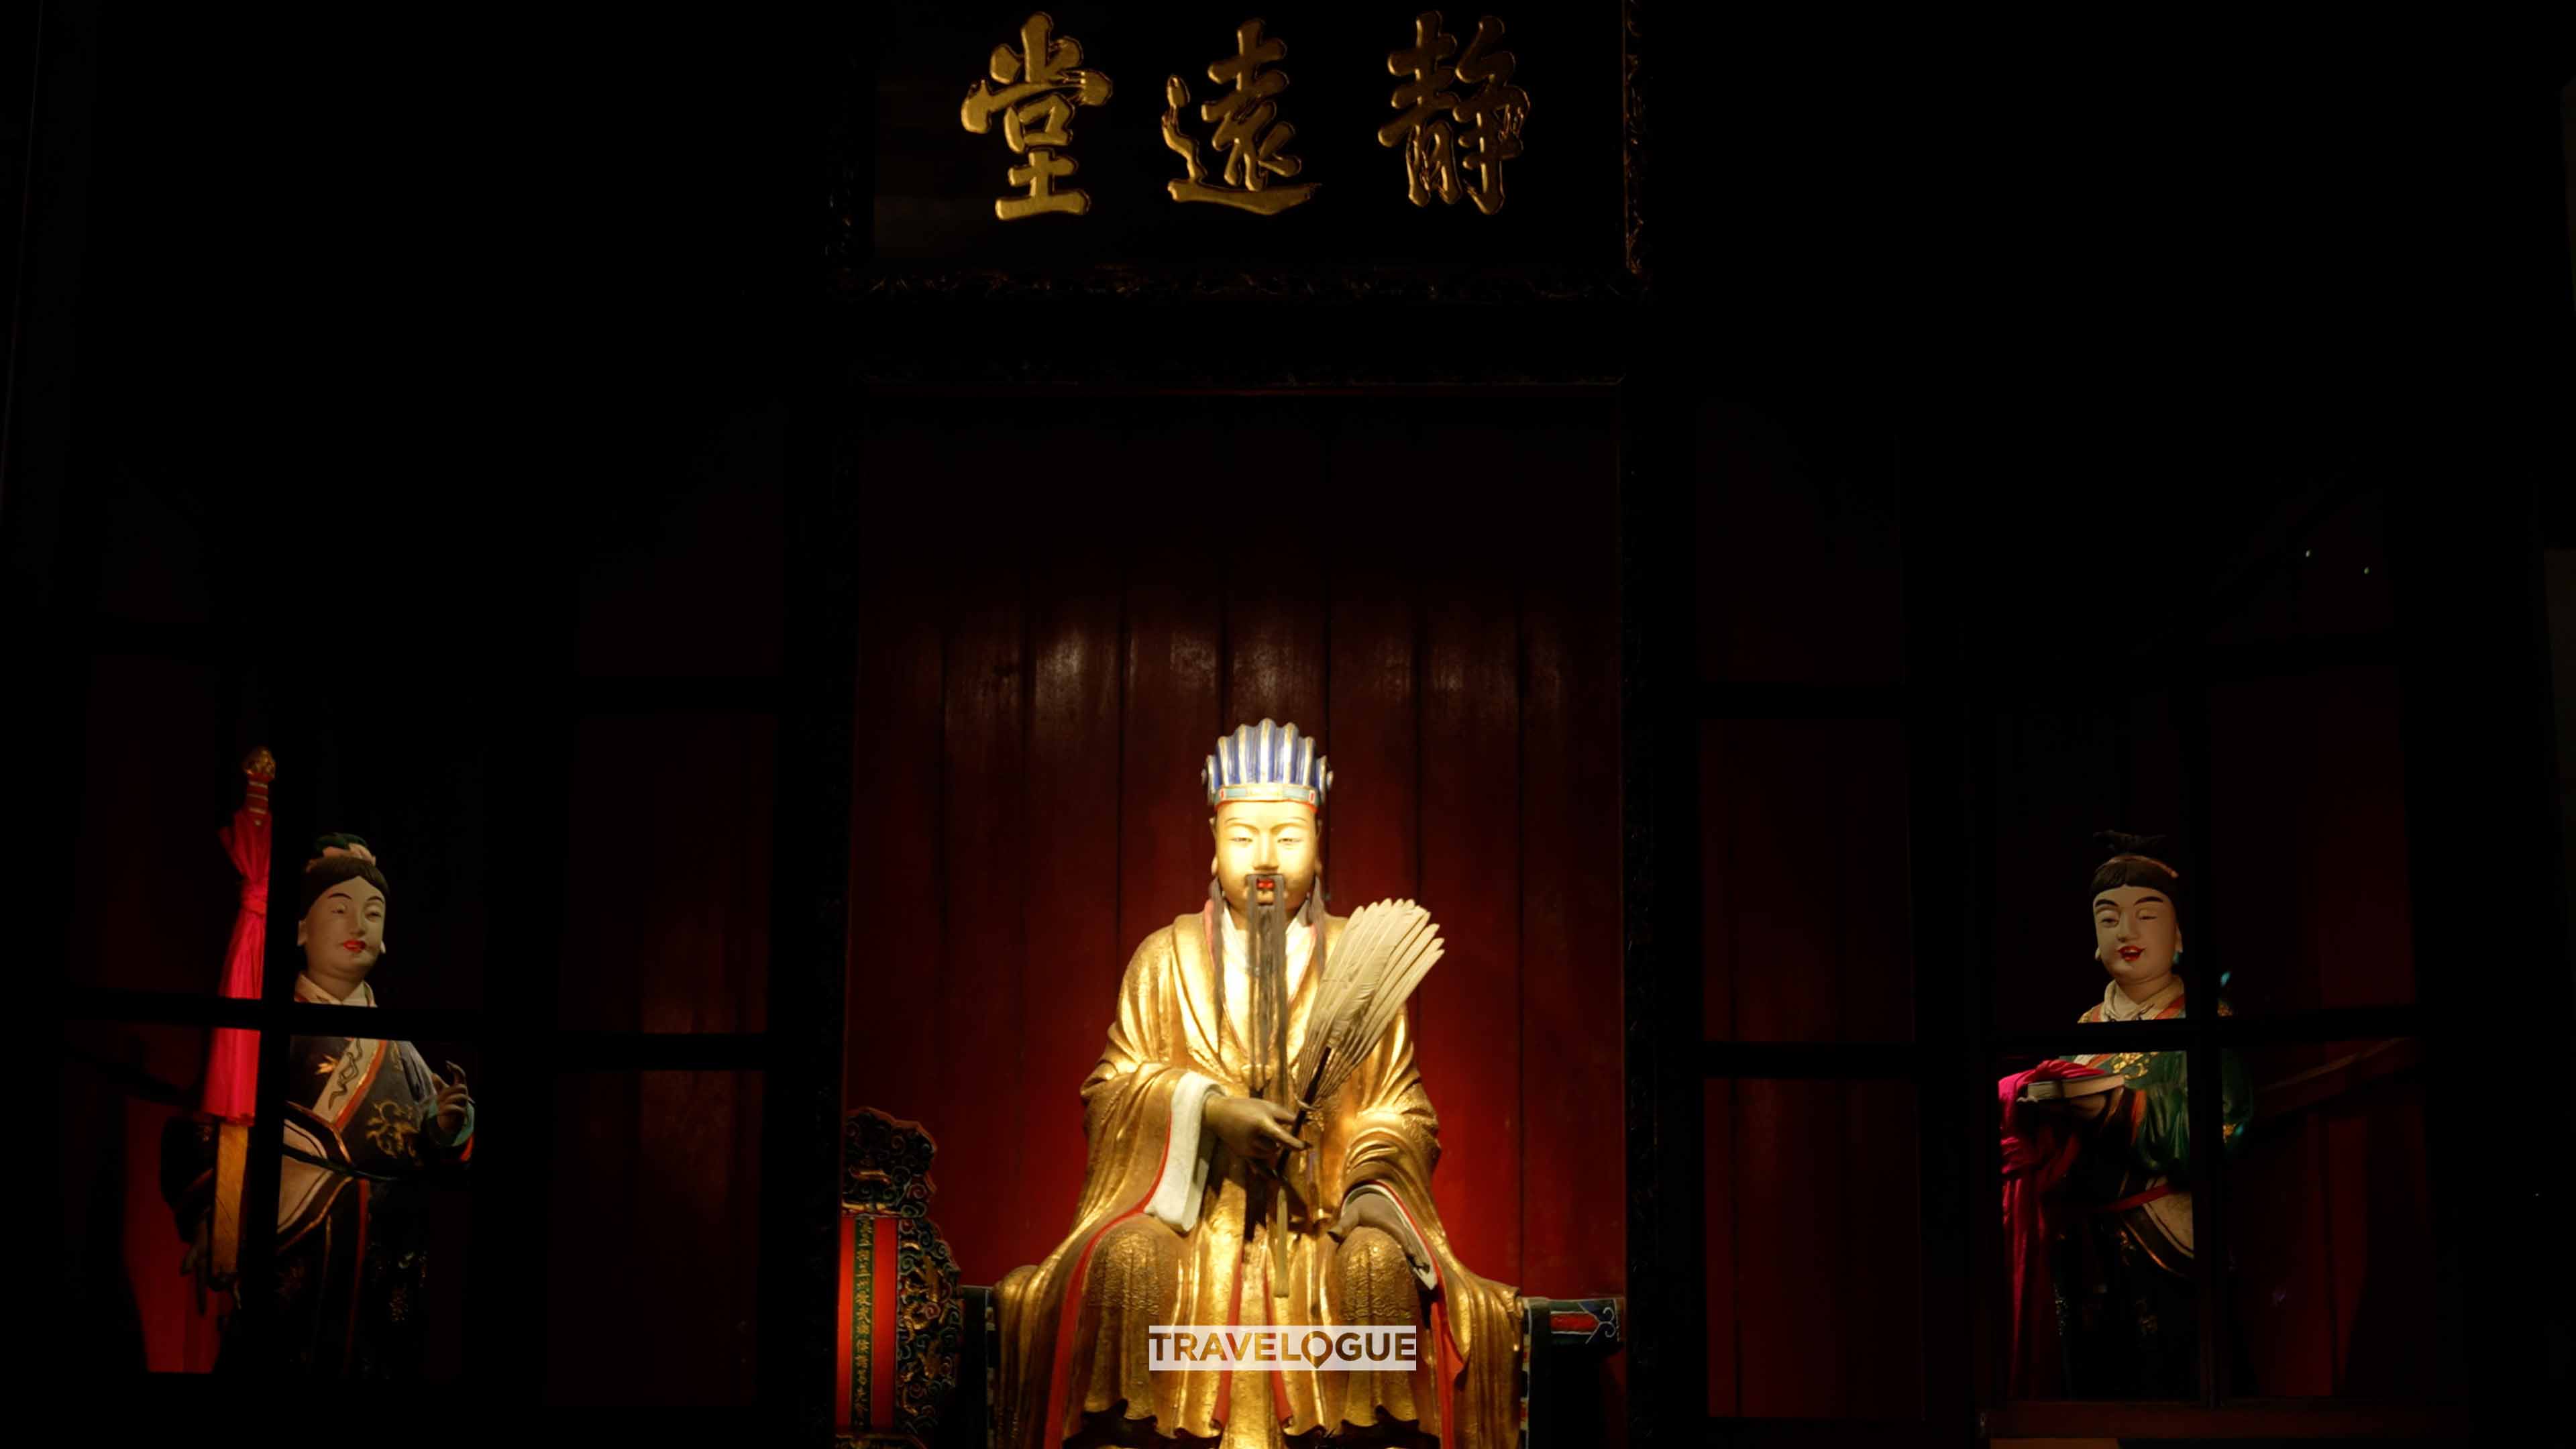 A statue of Zhuge Liang is seen in the Jingyuan Hall at the Wuhou Shrine in Chengdu, southwest China's Sichuan Province. /CGTN